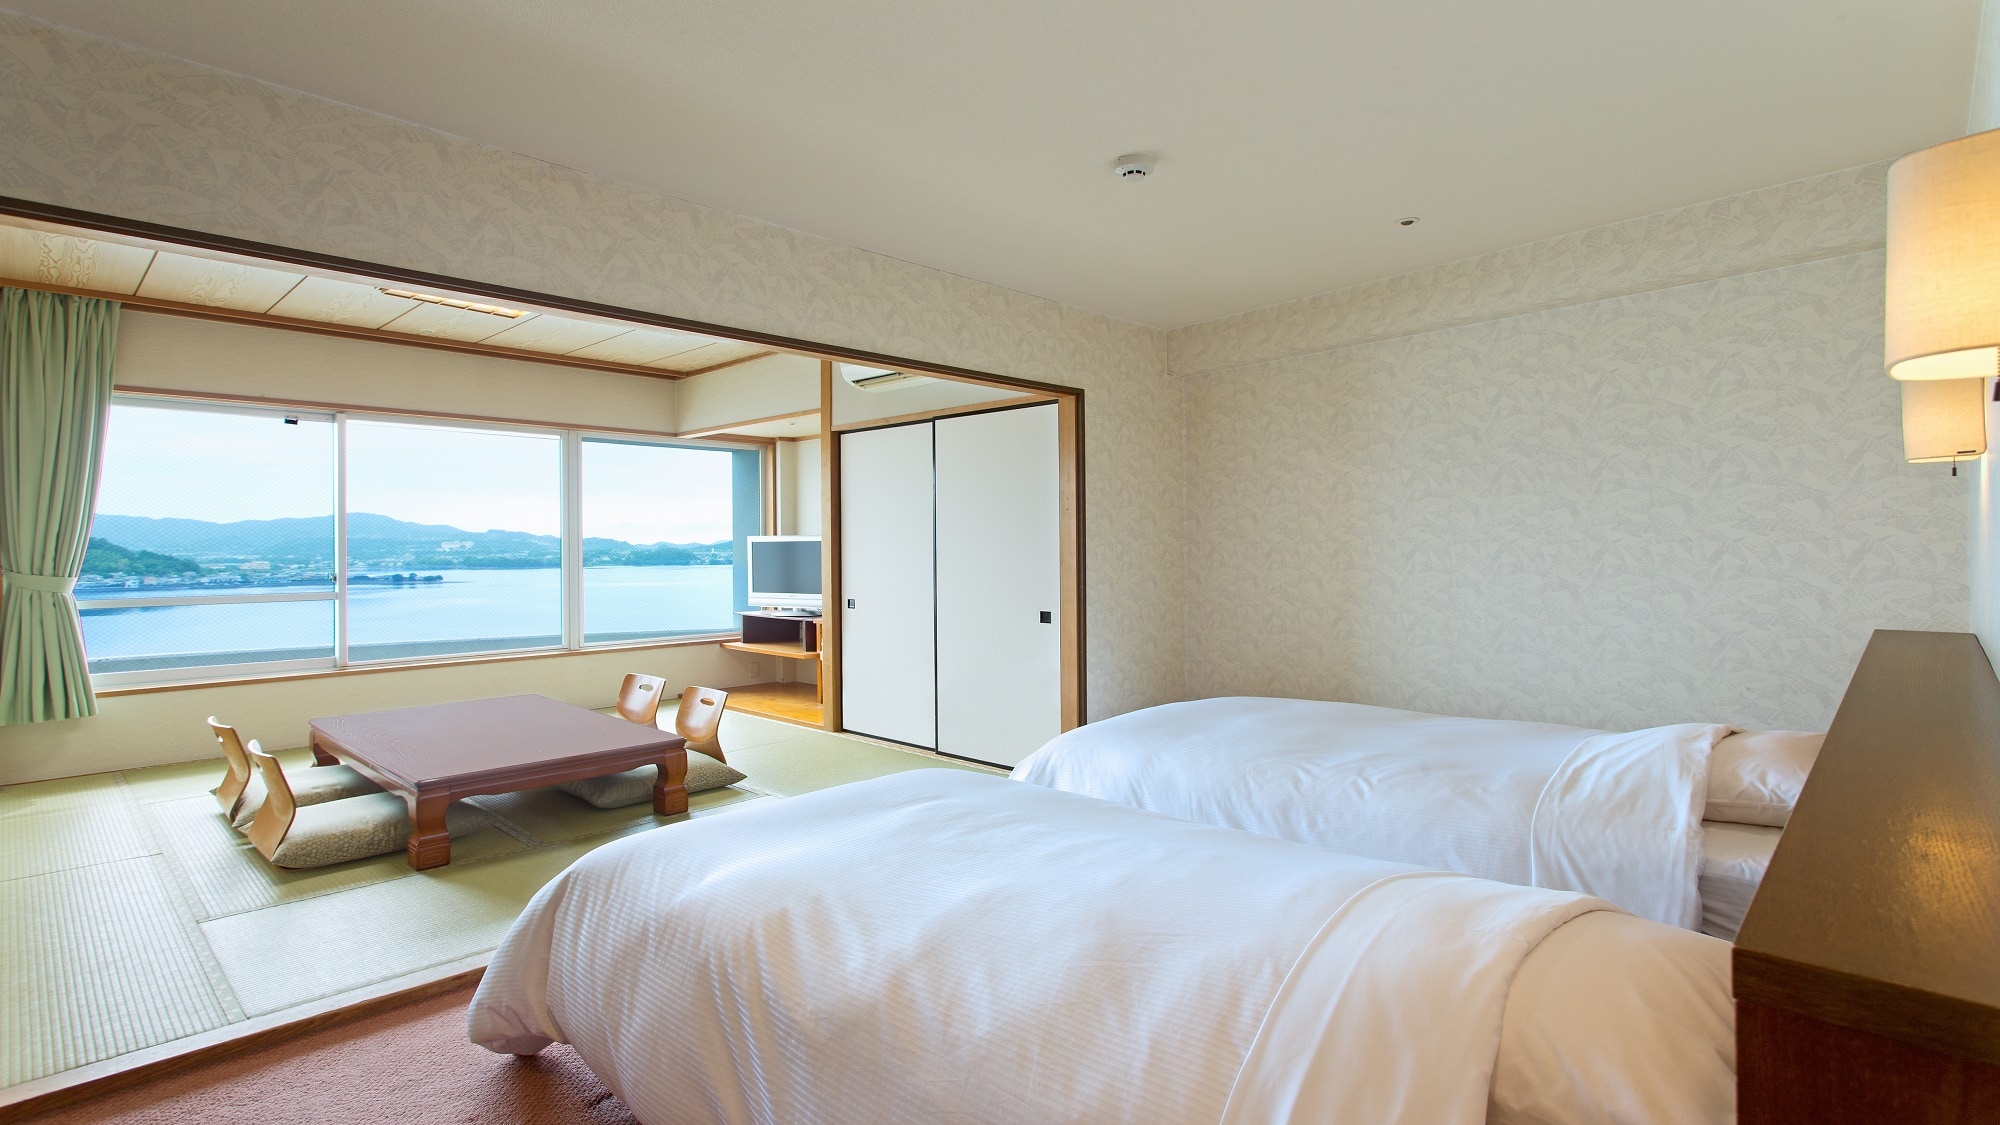 [Guest room] Classe building Japanese-Western style room 5 people capacity (example)